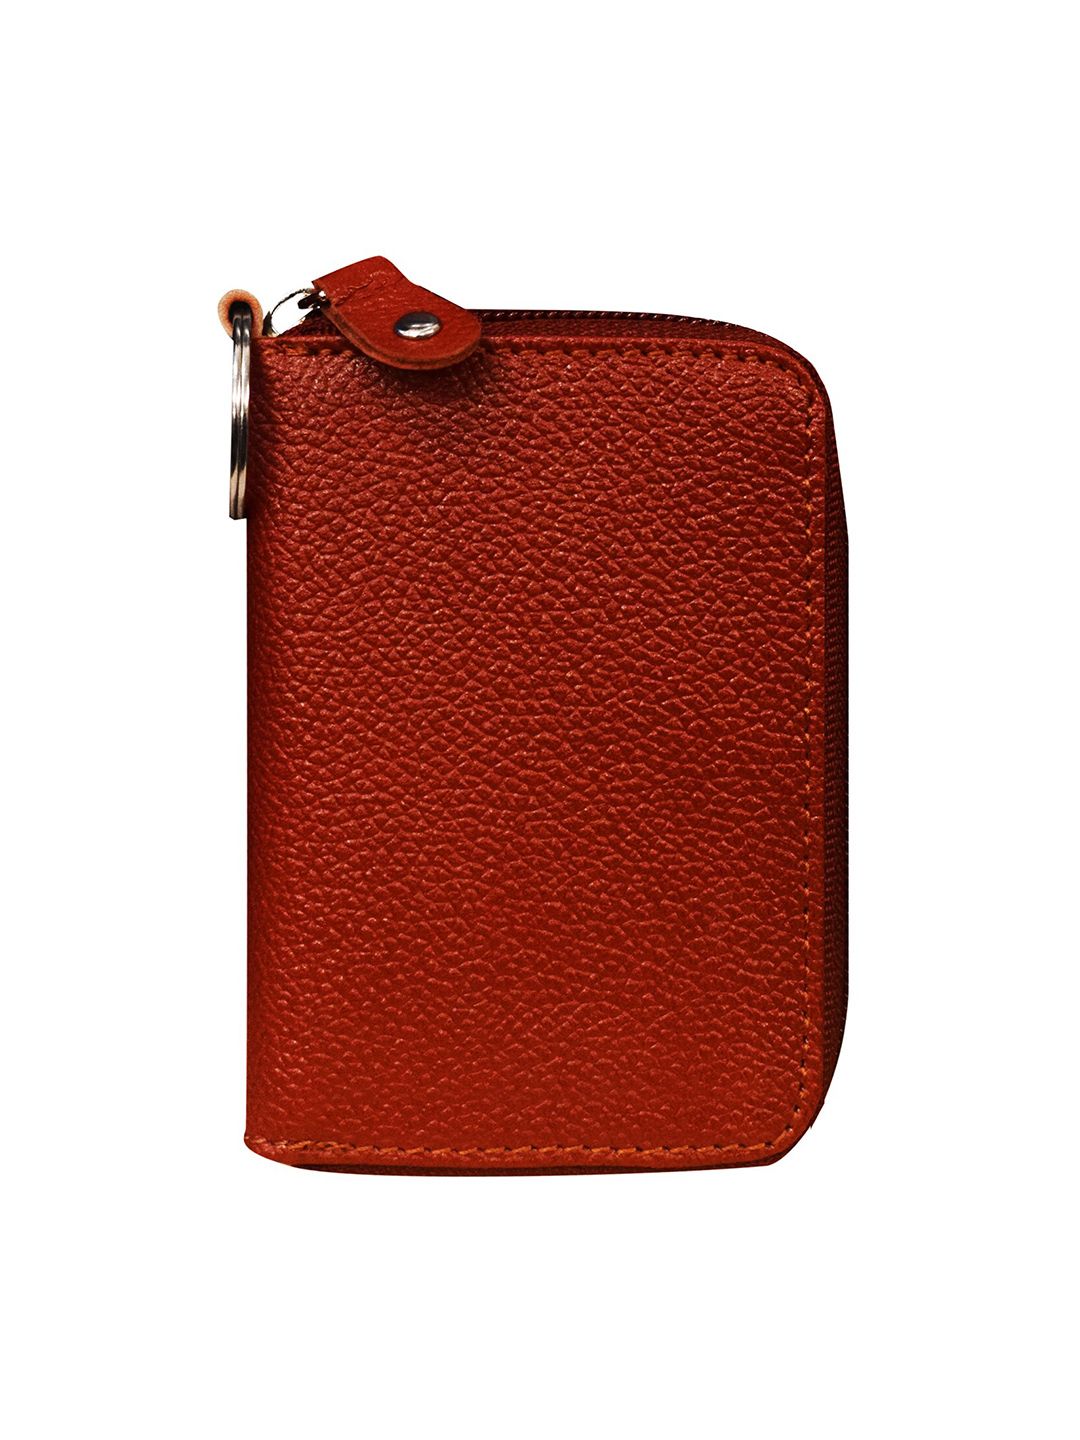 ABYS Unisex Brown Textured Leather Card Holder Wallet Price in India